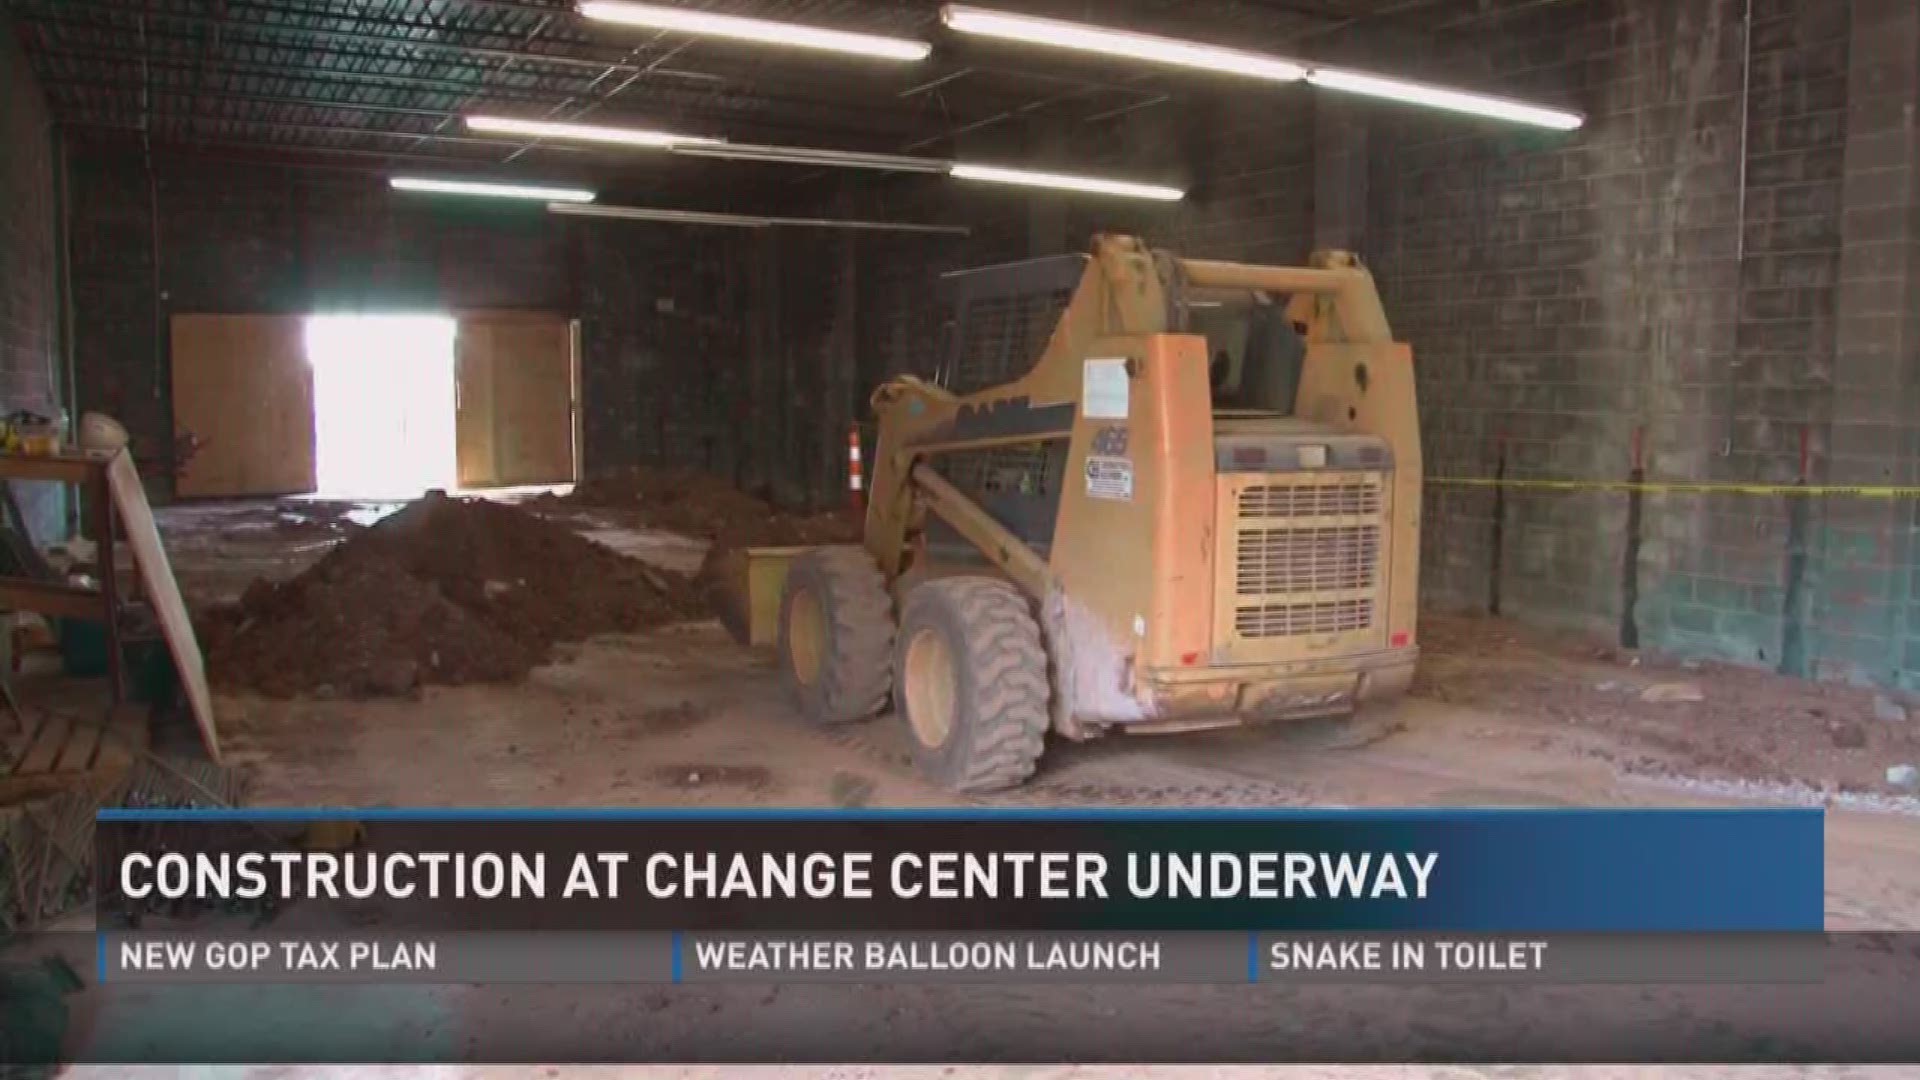 The Change Center will be a place for inner city kids to gather in a safe space for fun and learning.